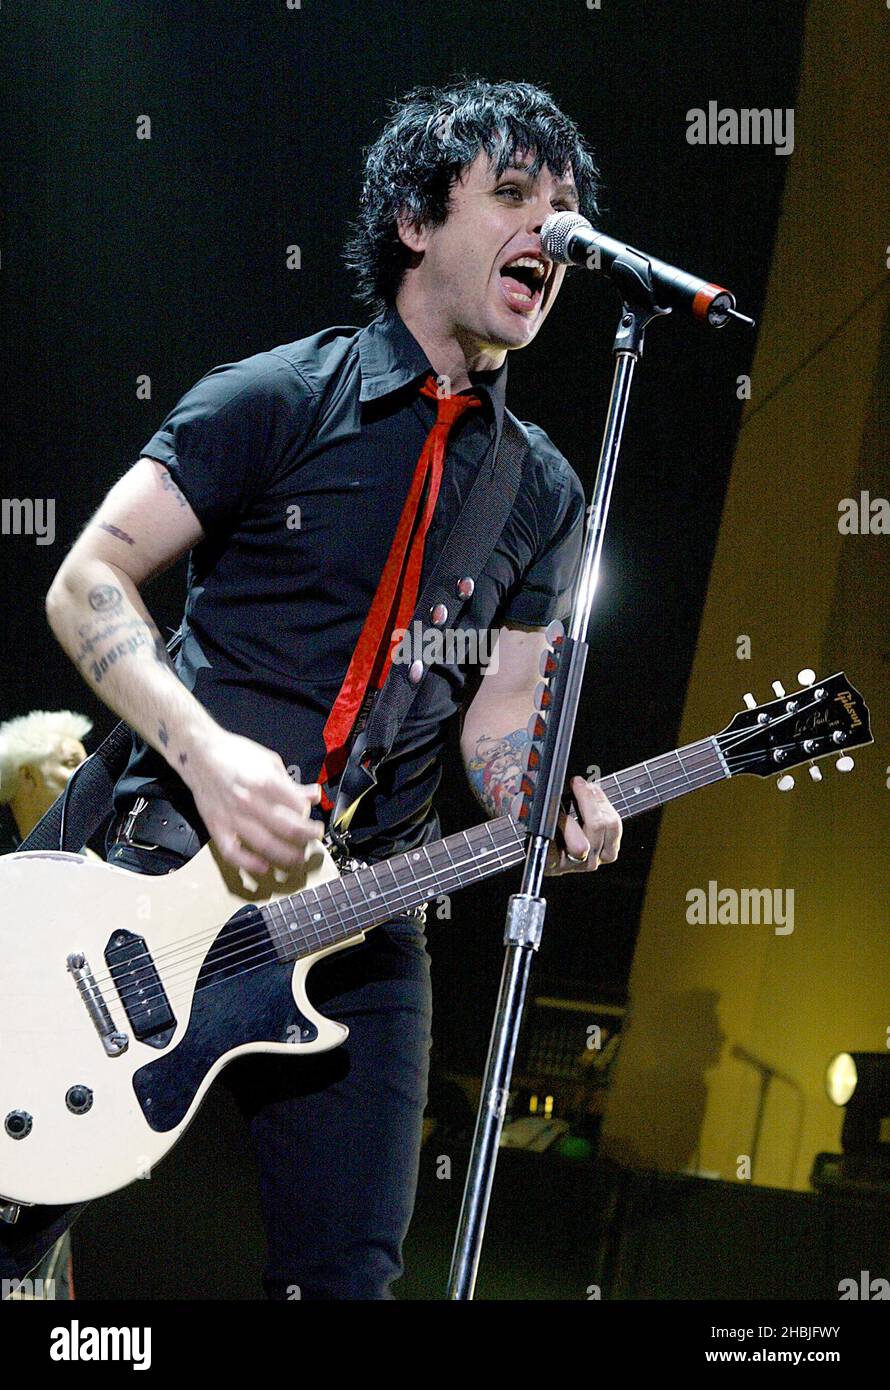 Californian band Green Day play London gig of their first UK tour in two years, at the Carling Academy Brixton on January 25, 2005 in London. Stock Photo